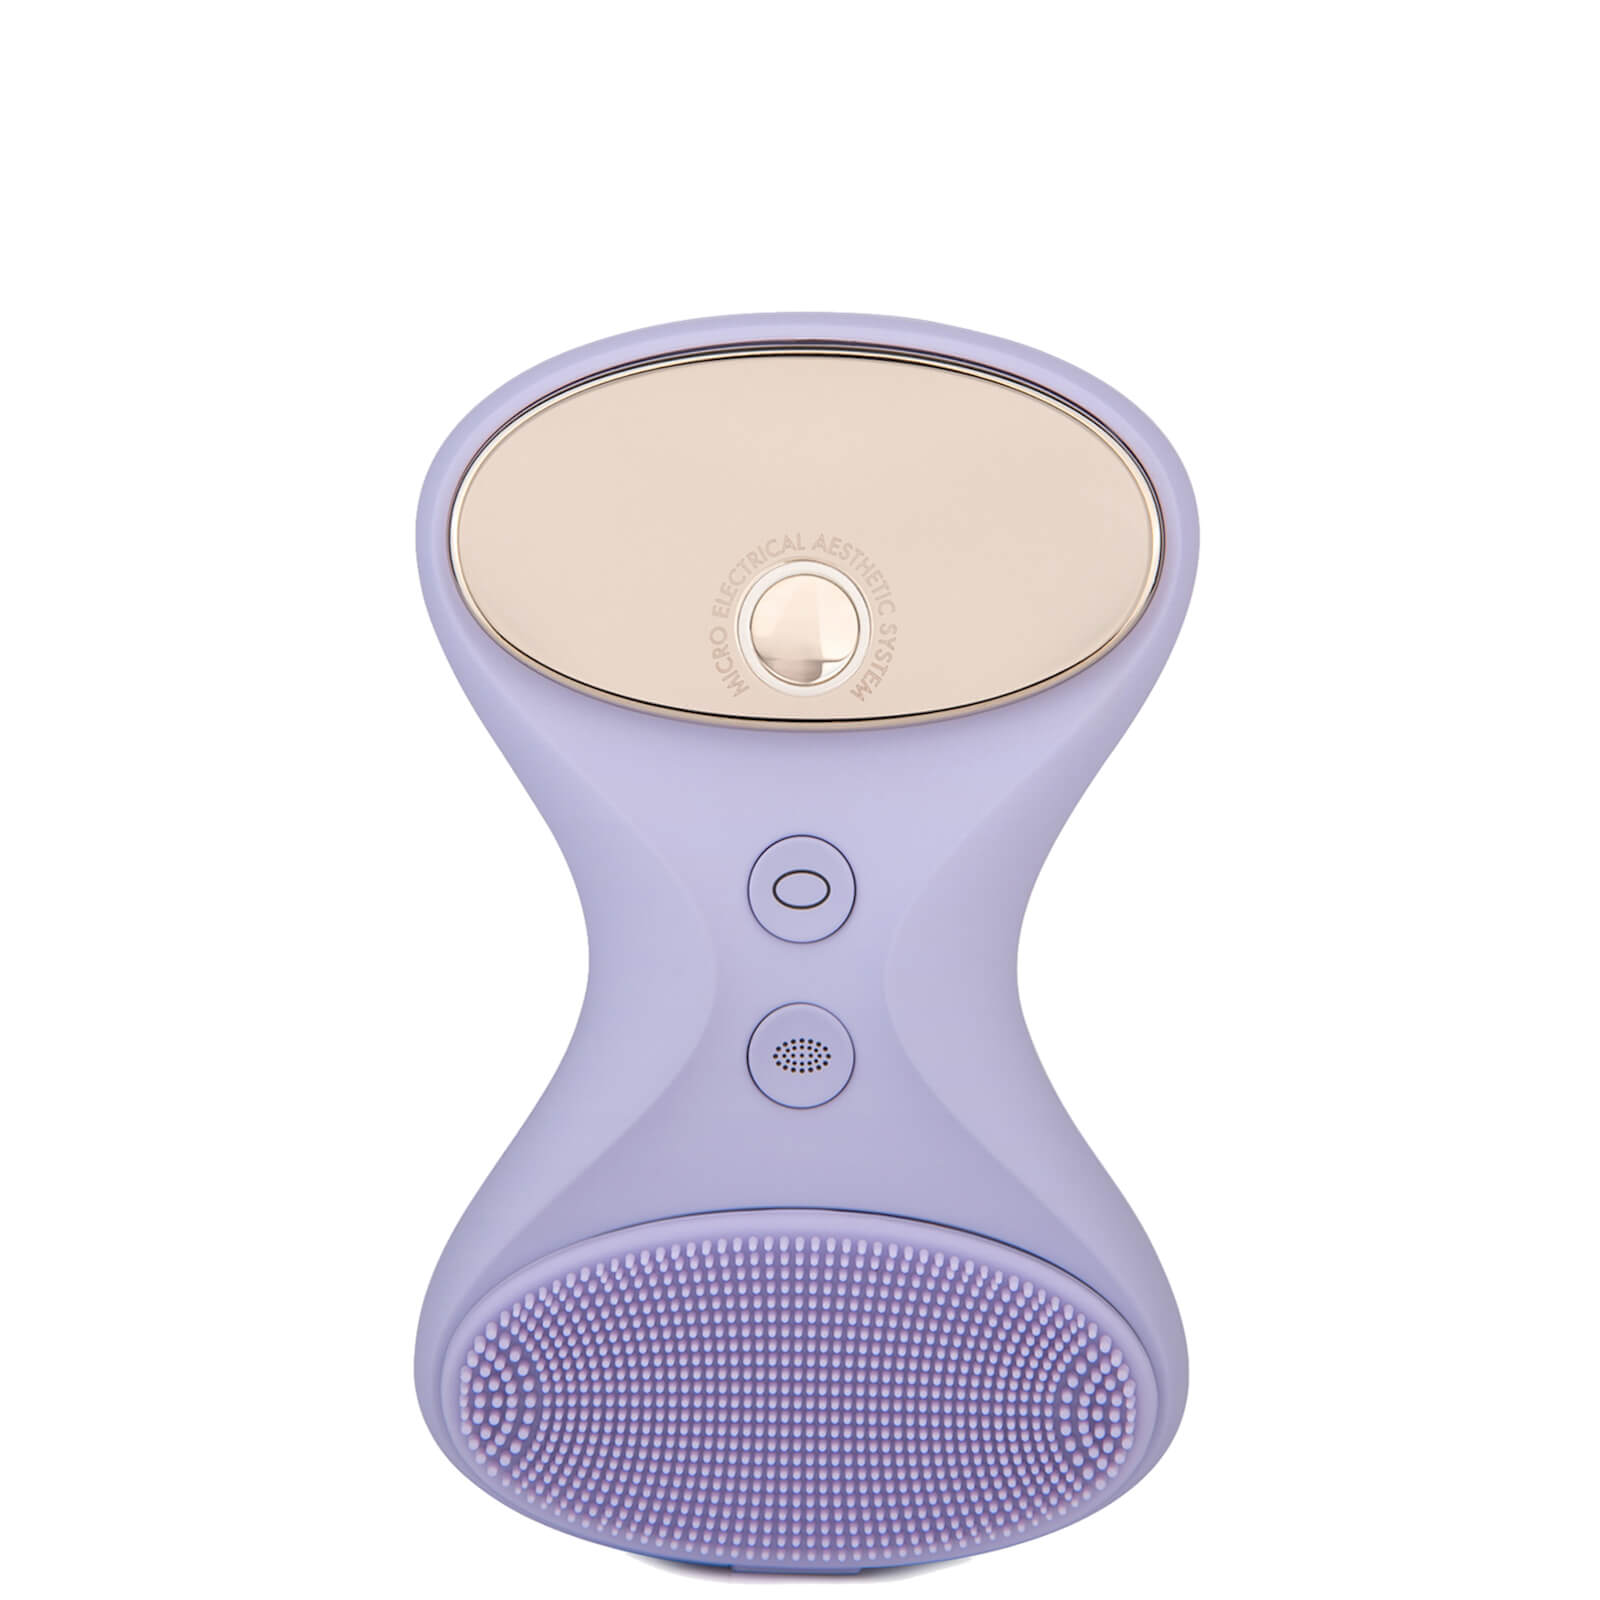 Image of BeGlow TIA MAS: Facial Toning and Cleansing Device - Lavender